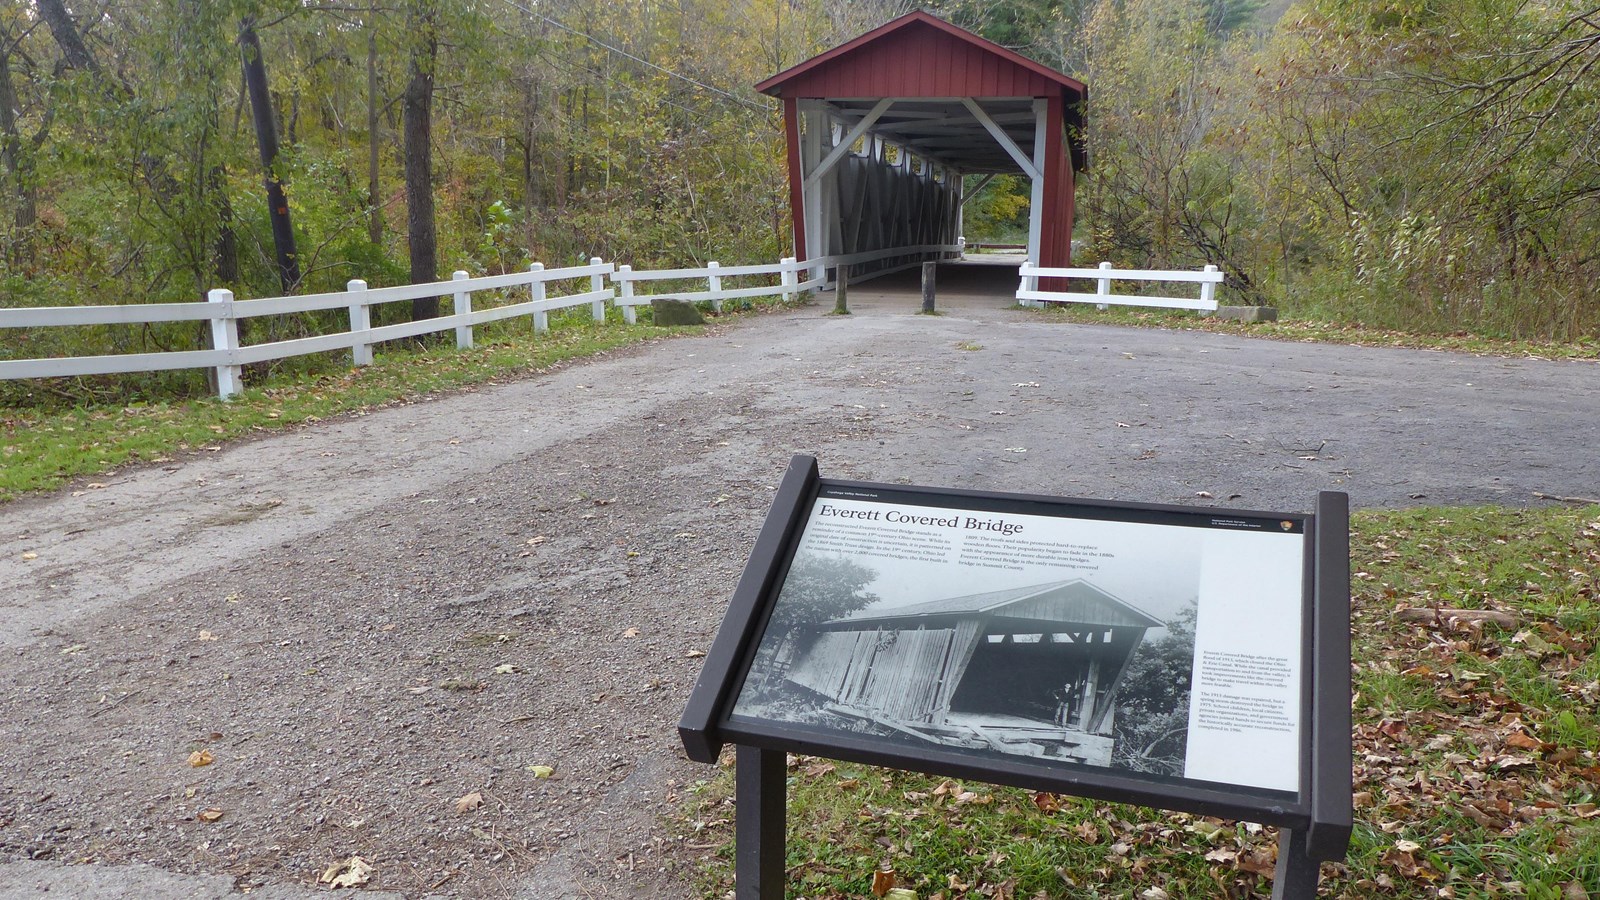 Graphic panel shows a historic photo of the red and white covered bridge beyond.